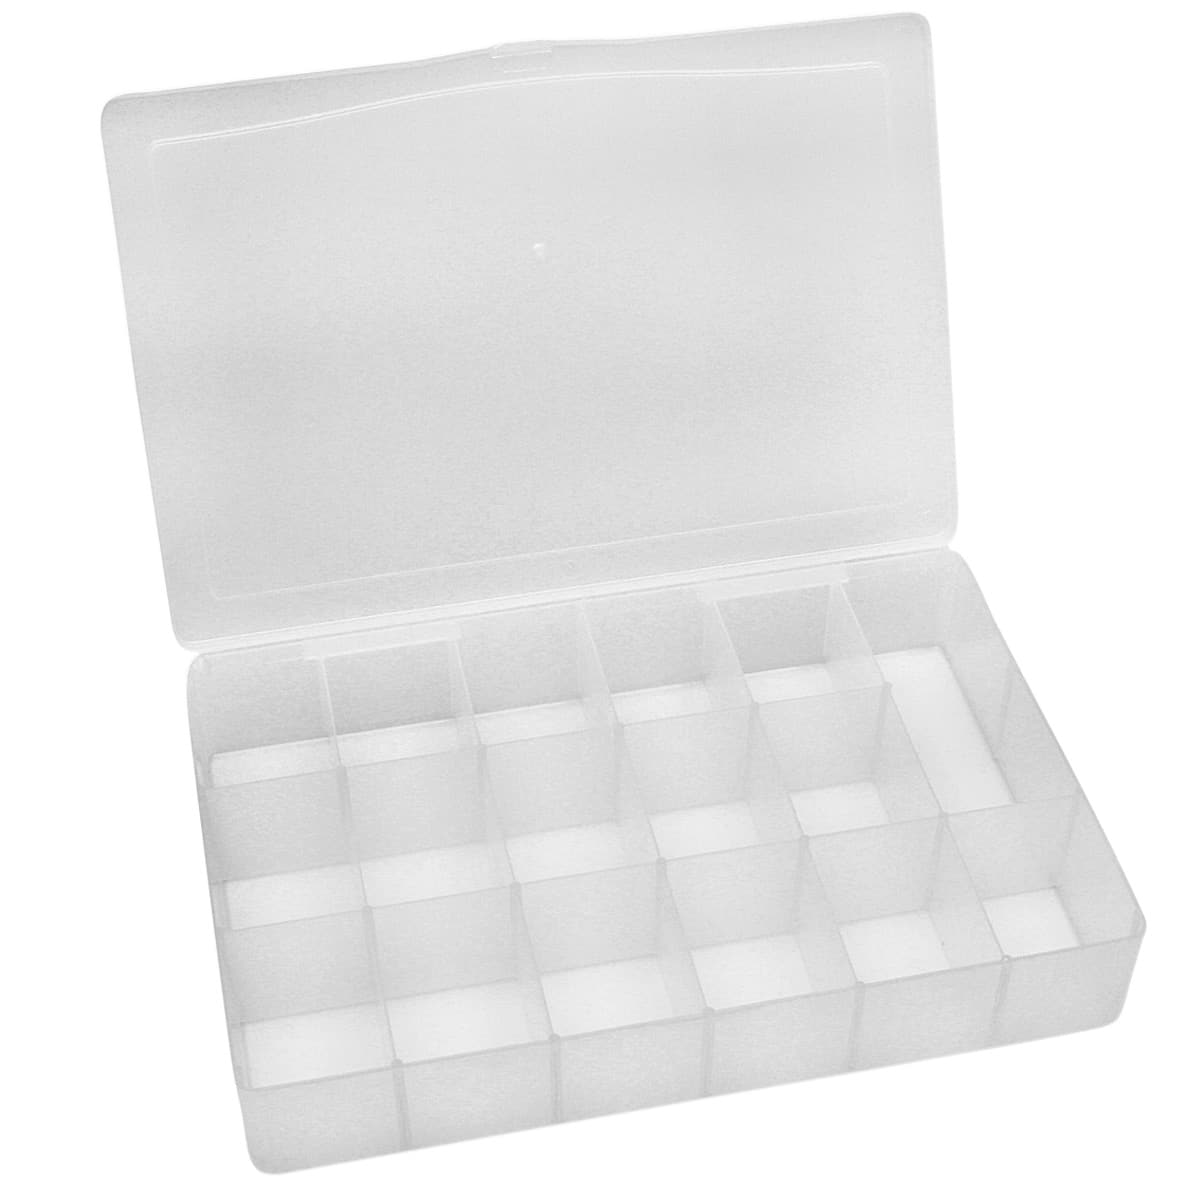 Plastic Bead Organizer Tray with 12 Containers - RioGrande